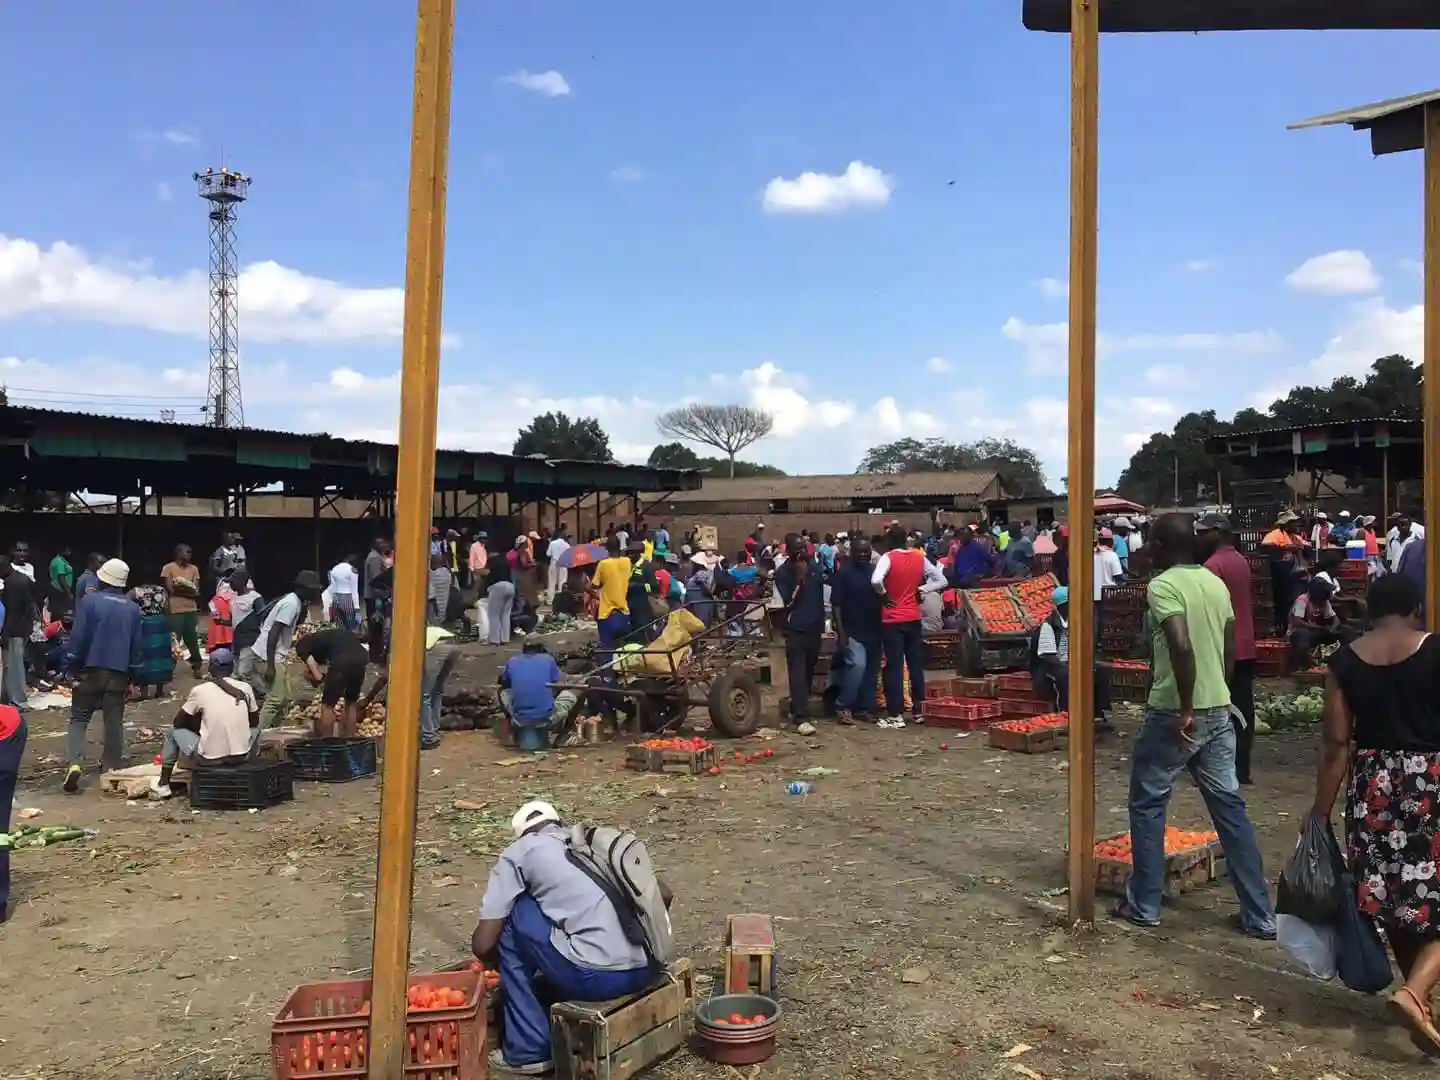 WATCH: Business As Usual In Mbare Harare Despite Lockdown